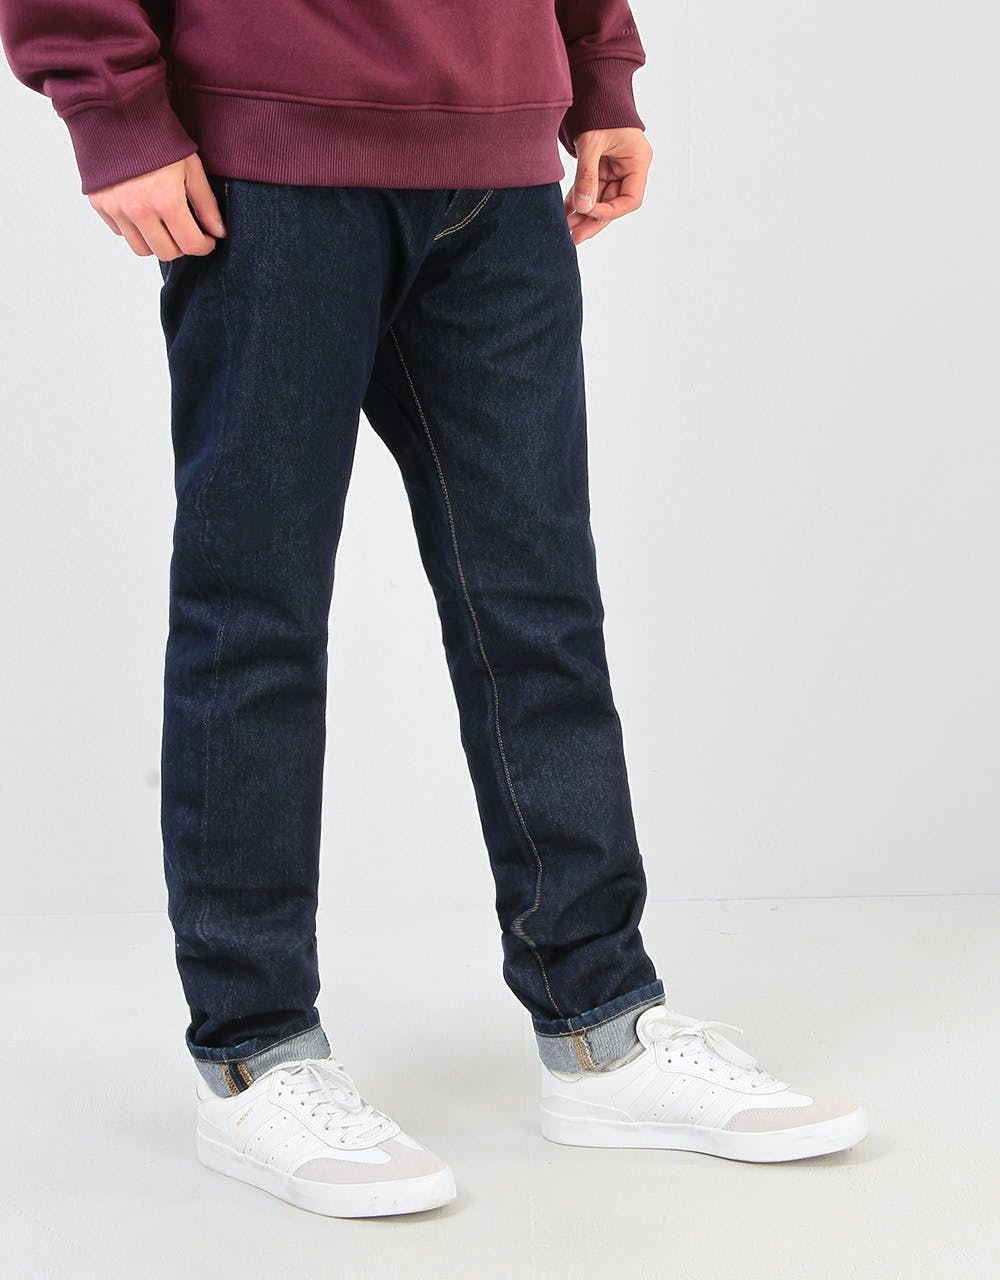 Carhartt WIP Vicious Pant - Blue (Rinsed) – Route One